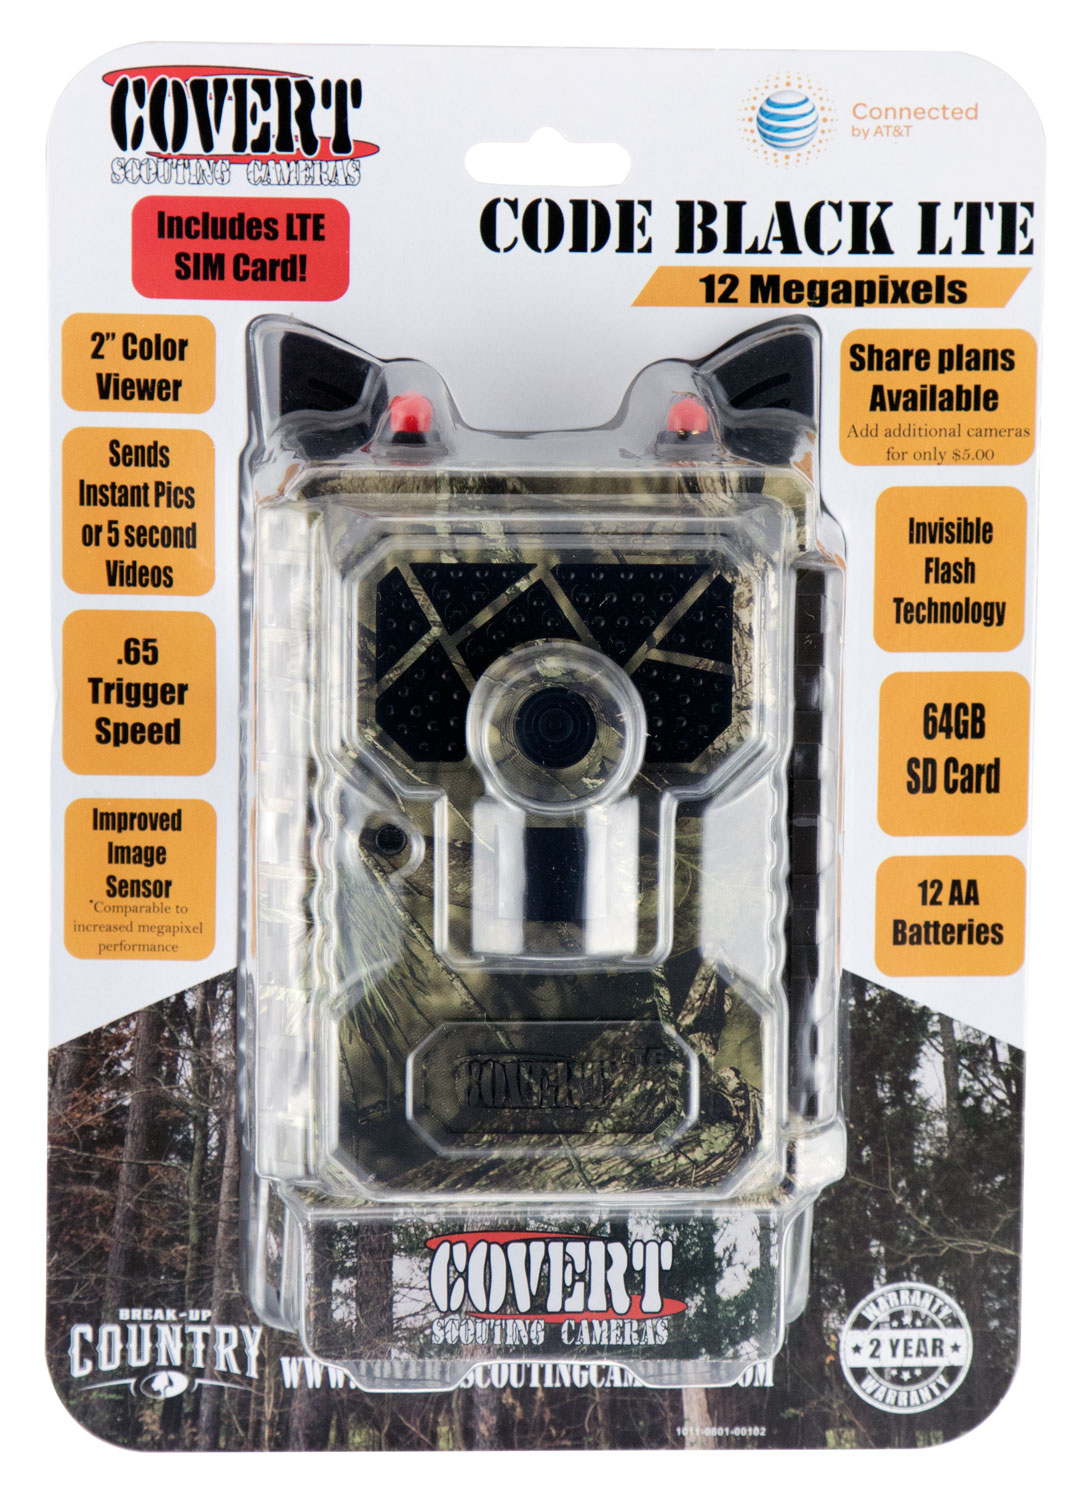 Covert Scouting Cameras 5472 Code Black LTE Trail Camera 12 MP 60 No Glow LED Mossy Oak AT&T